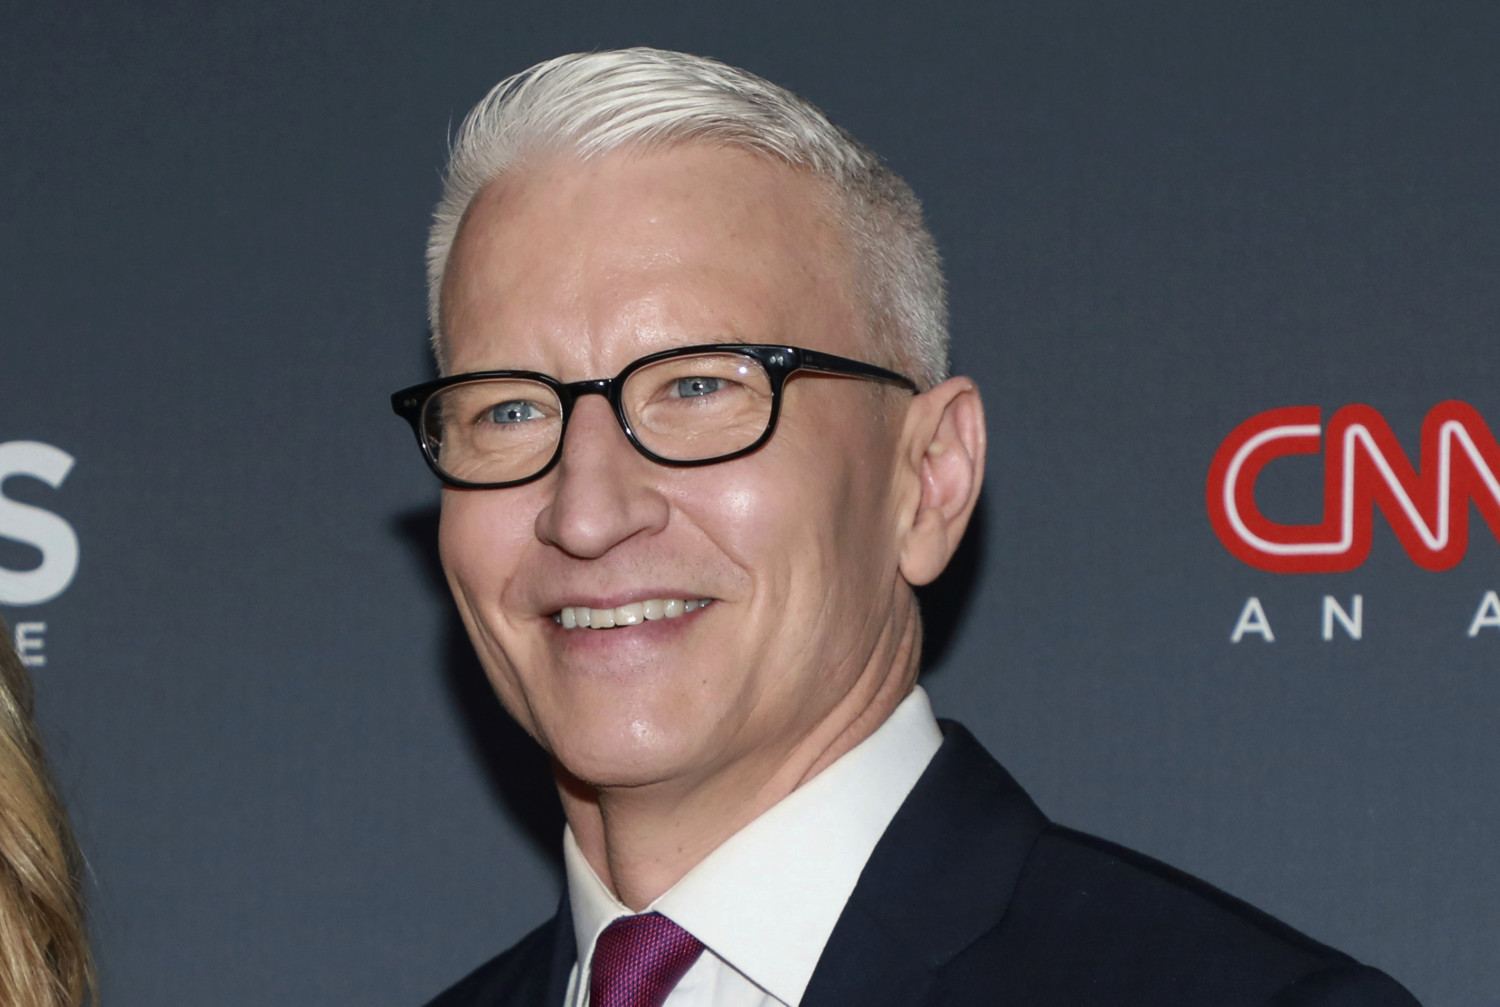 Anderson Cooper will replace Alex Trebek on Jeopardy!